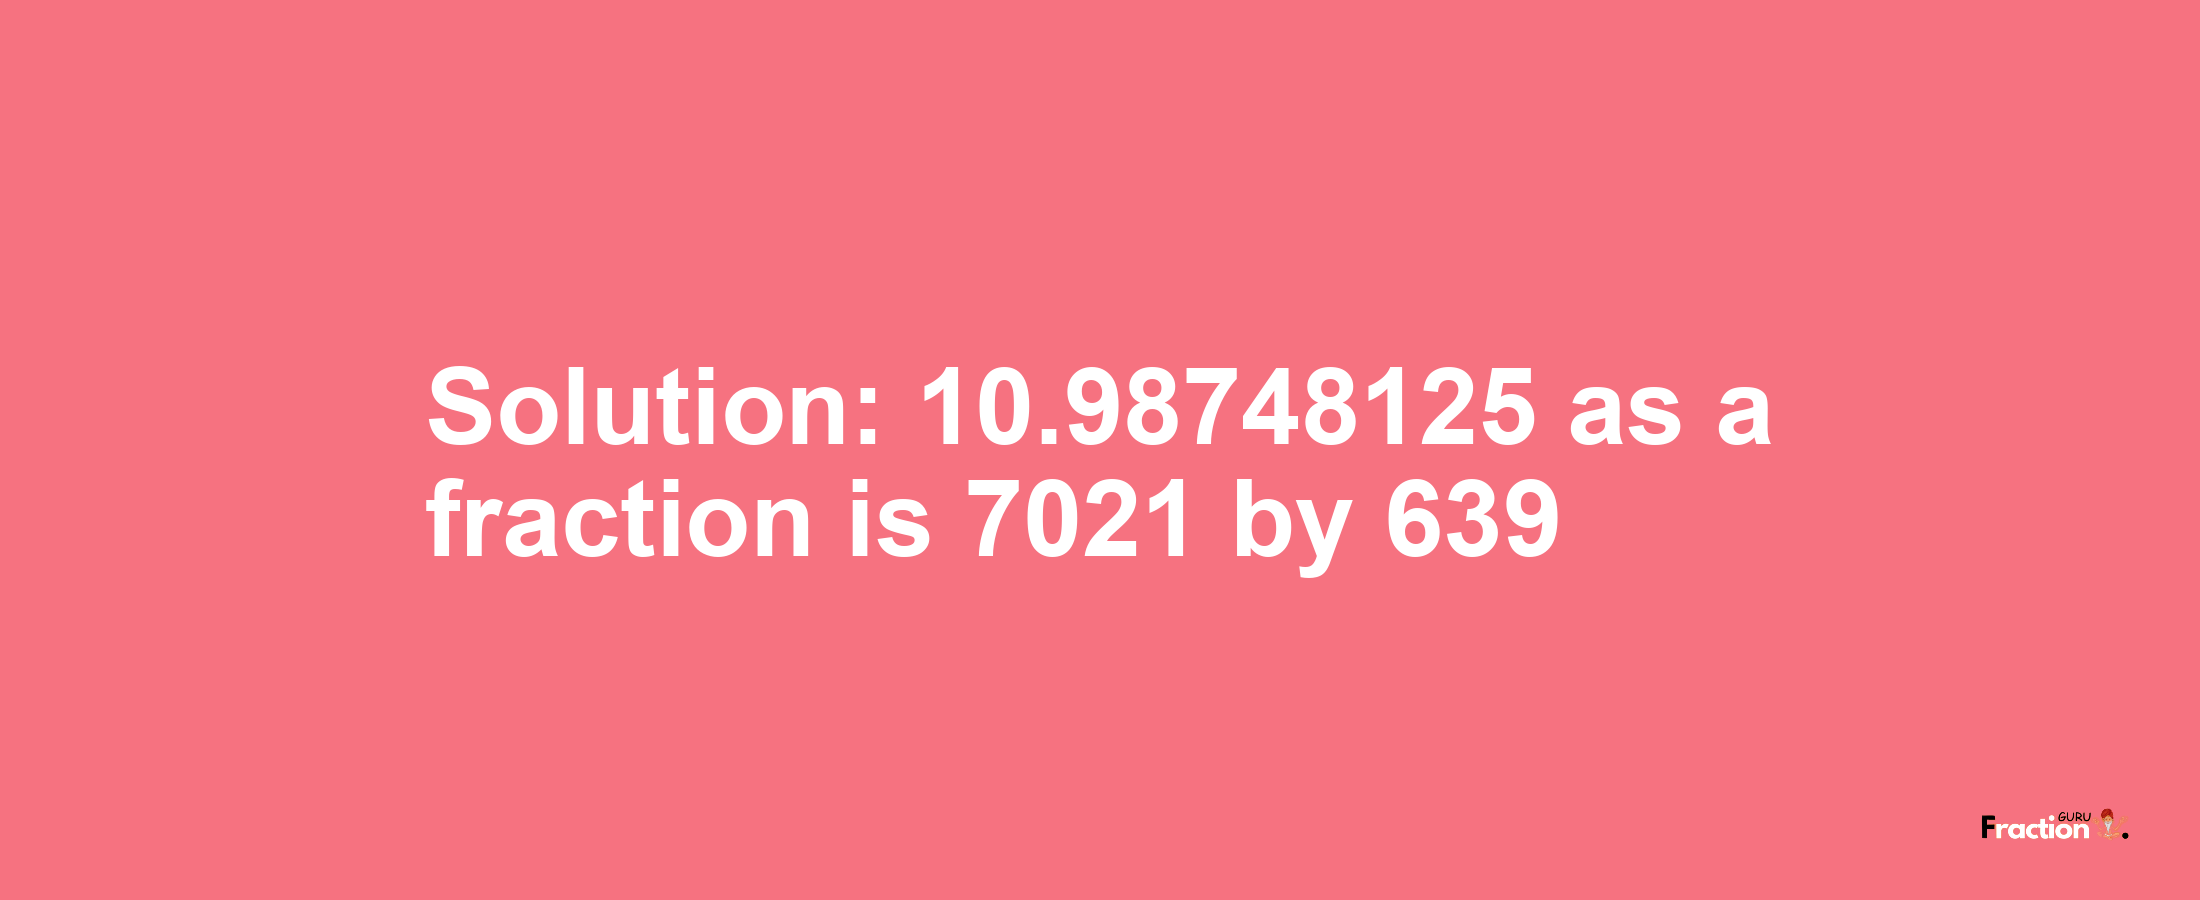 Solution:10.98748125 as a fraction is 7021/639